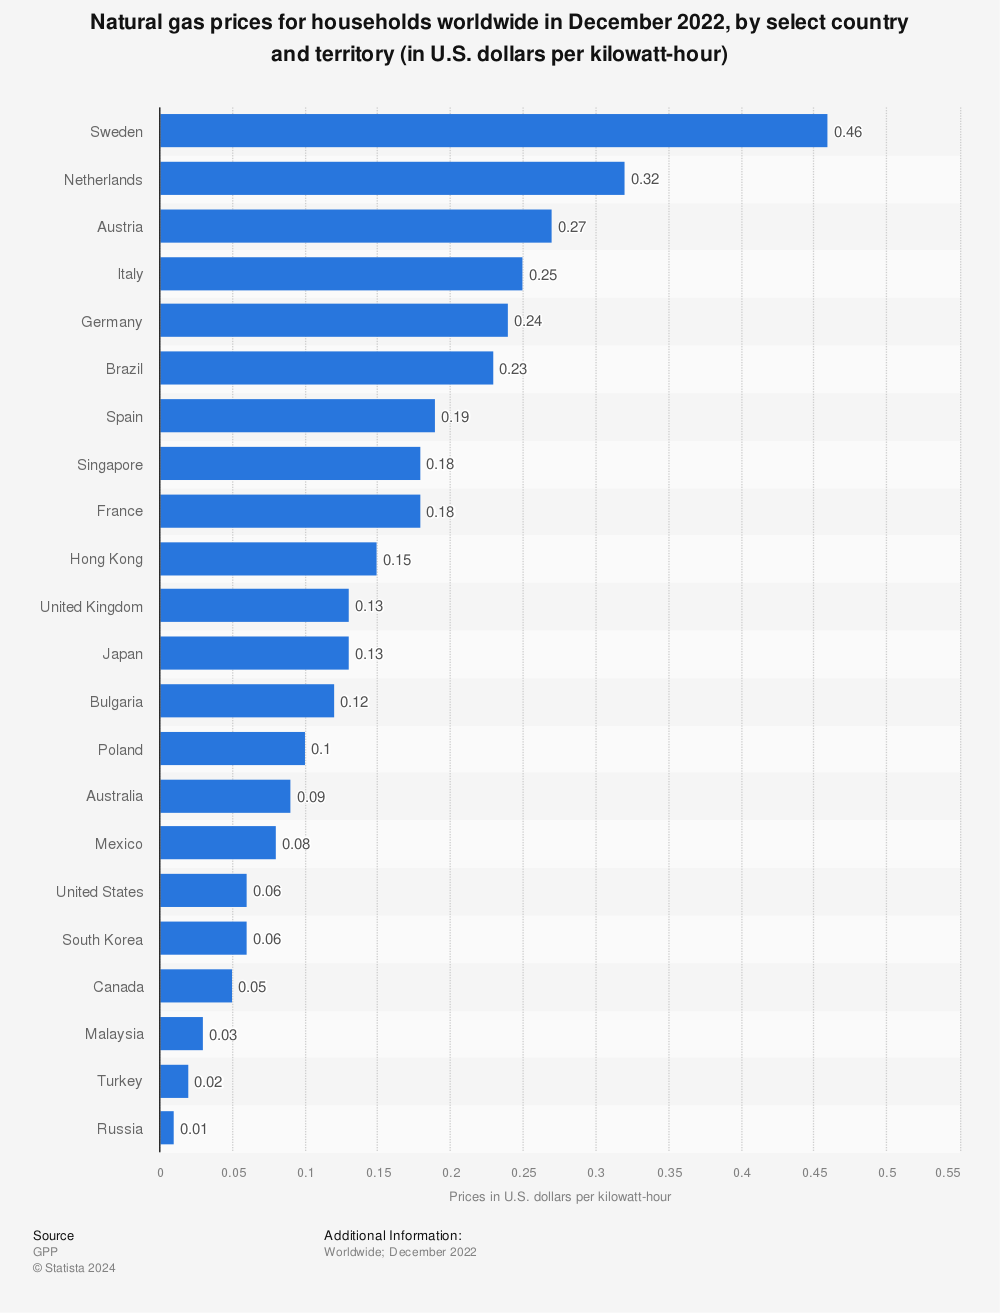 Statistic: Natural gas prices for households worldwide in 2020, by select country (in U.S. dollars per megawatt hour) | Statista